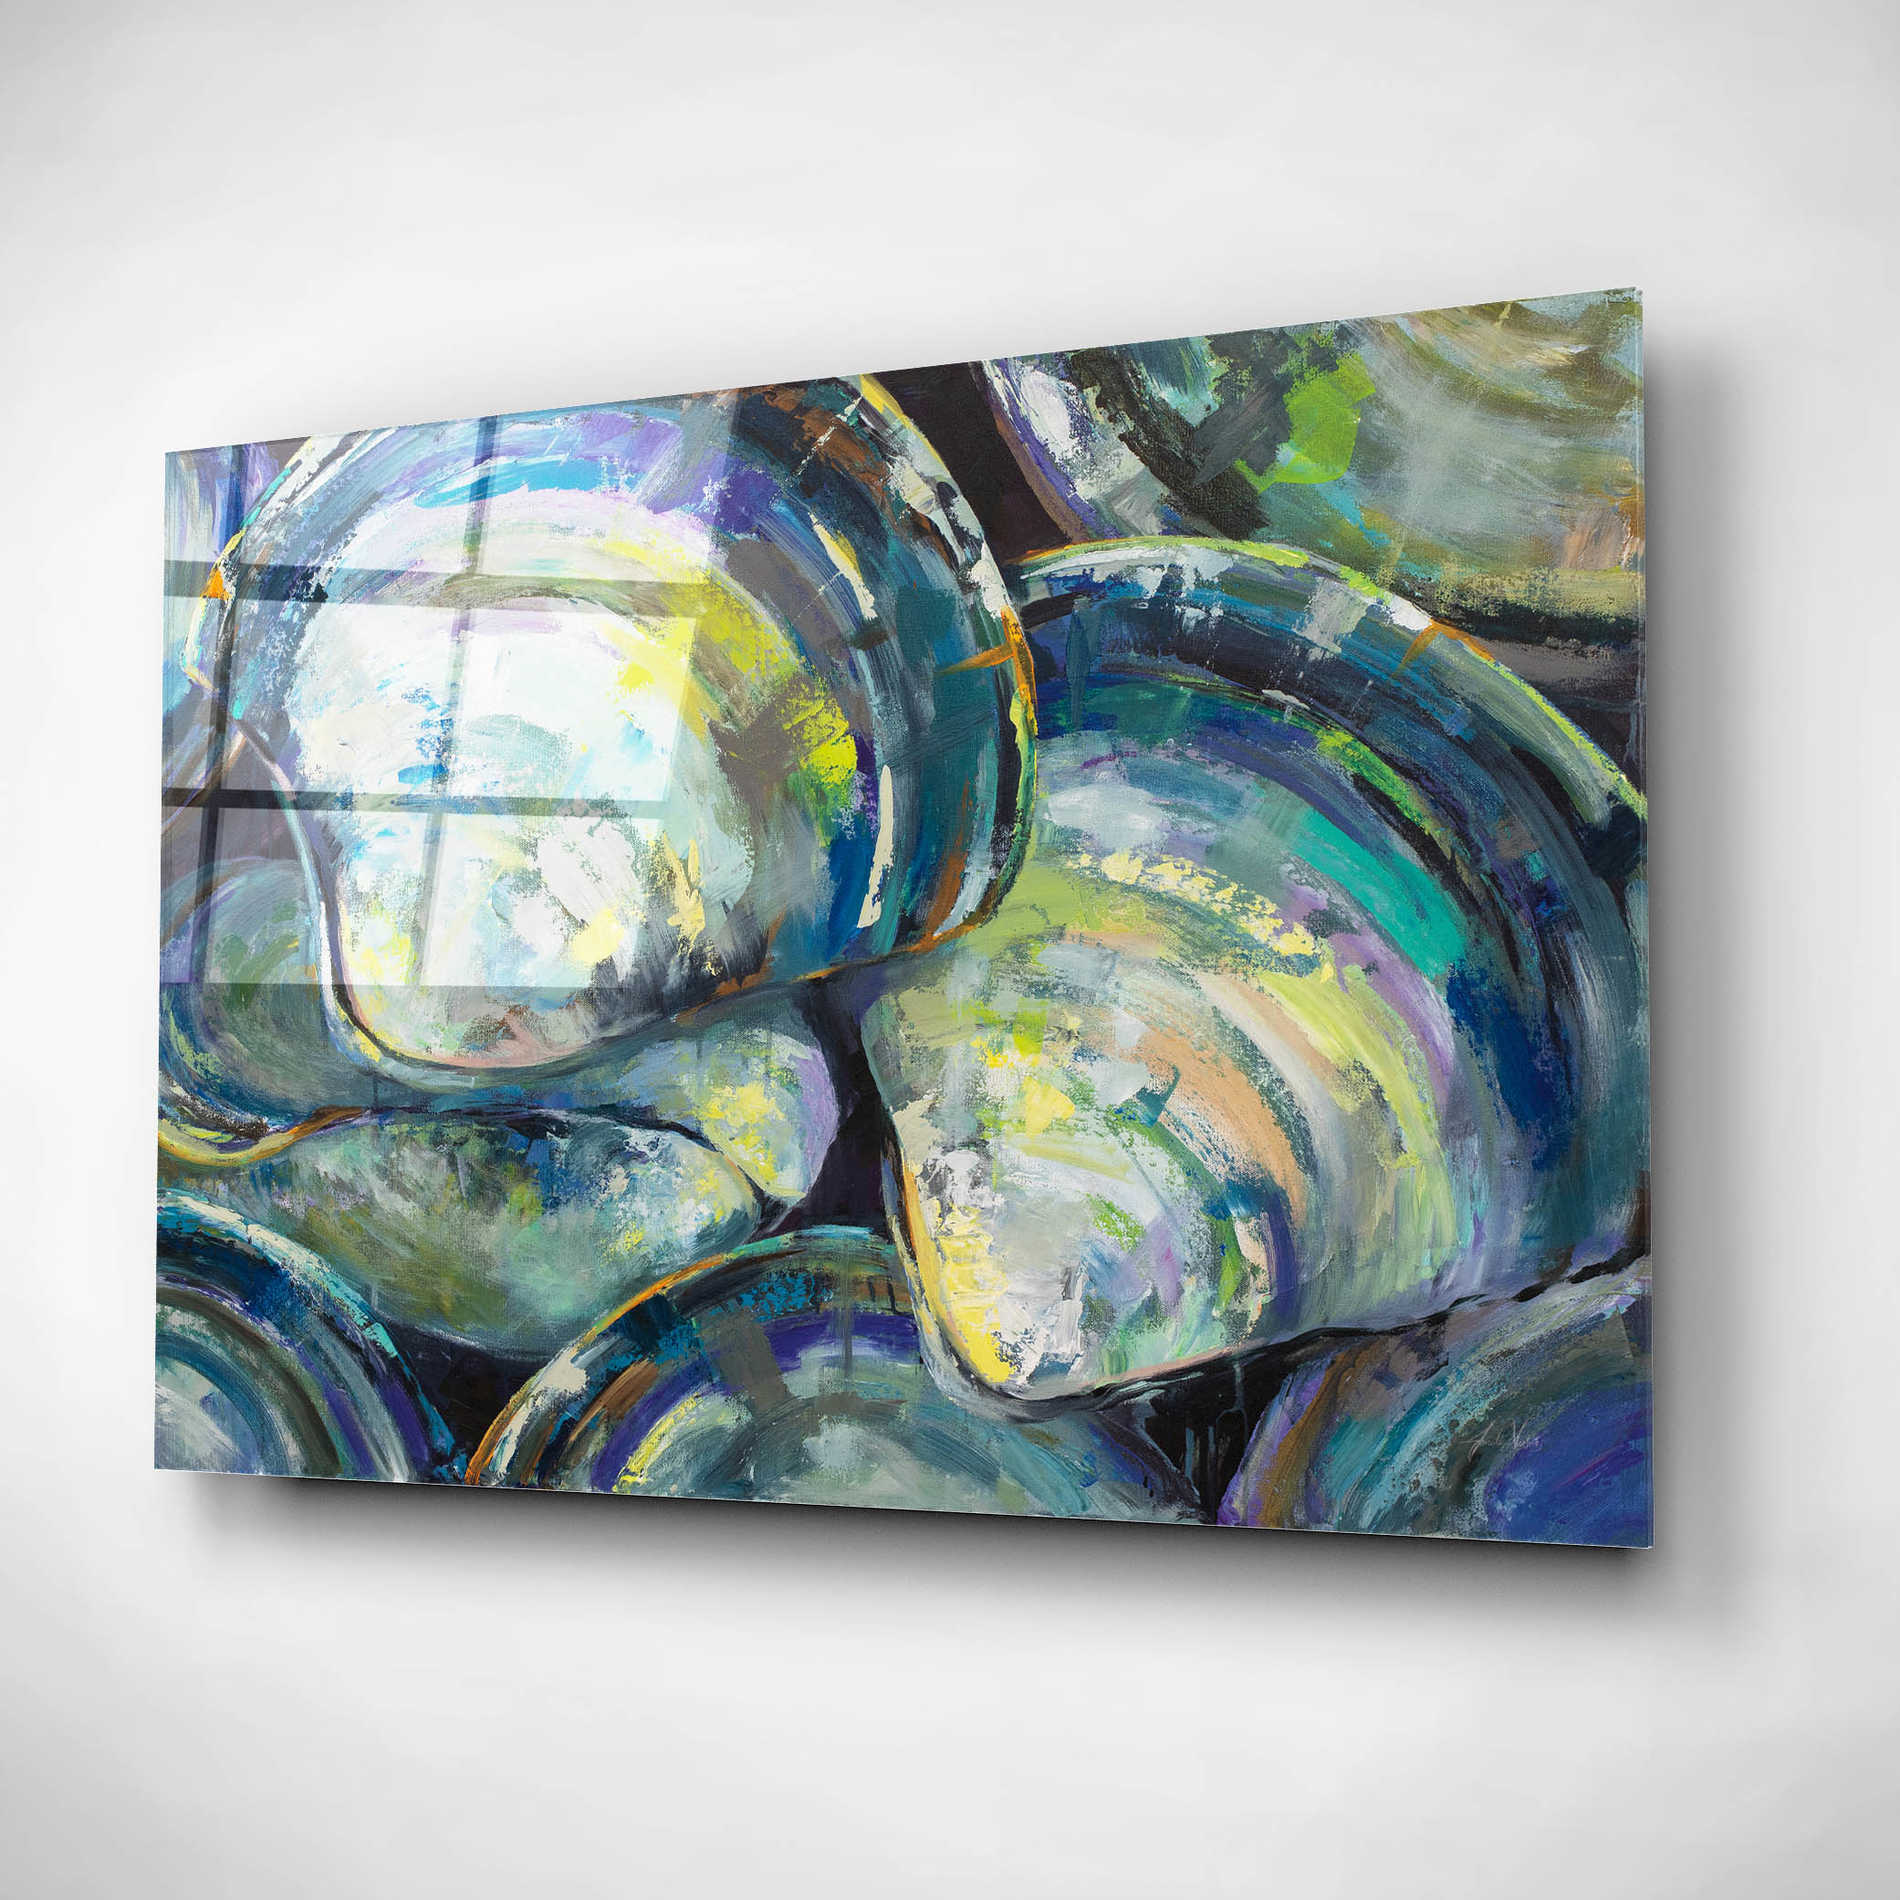 Epic Art 'Variety' by Jeanette Vertentes, Acrylic Glass Wall Art,16x12